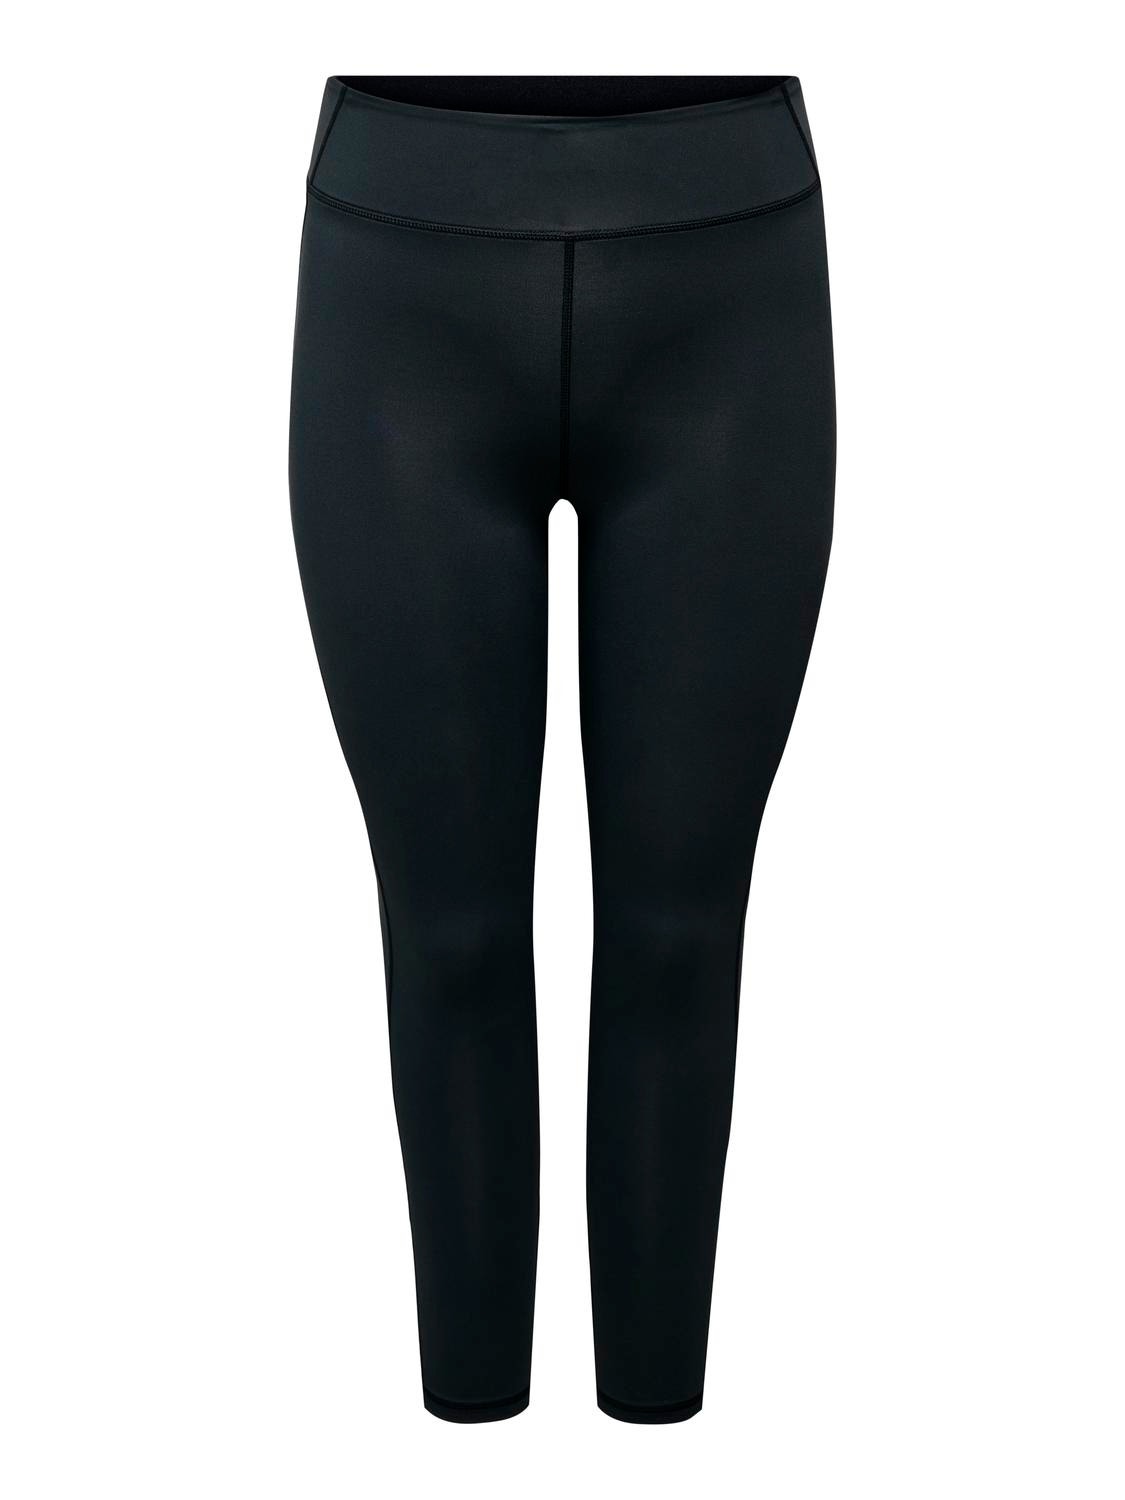 ONLY Tight Fit High waist Curve Leggings -Black - 15289014